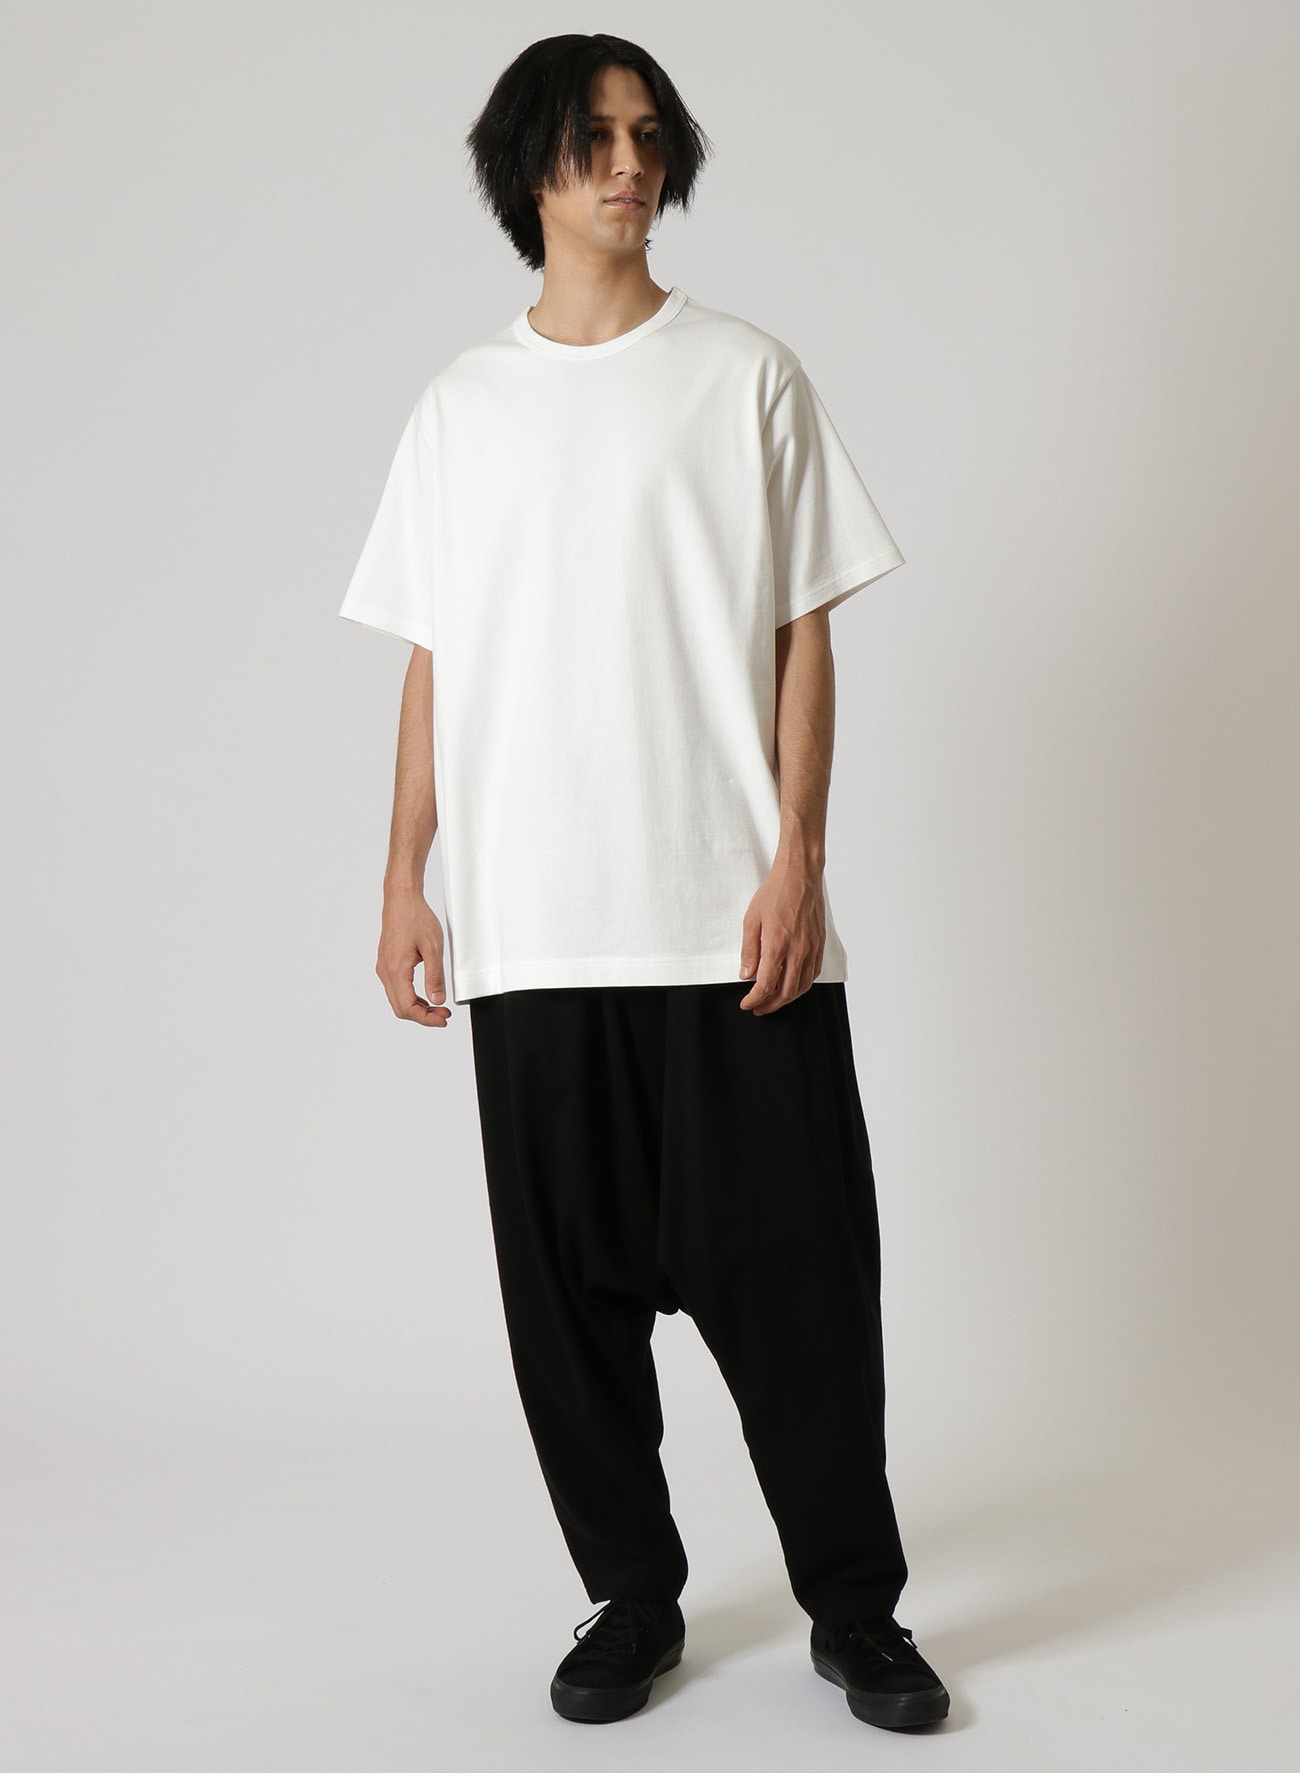 ULTIMA SILICON SOFTENED CREW NECK(M Off White): Vintage 1.2｜THE 